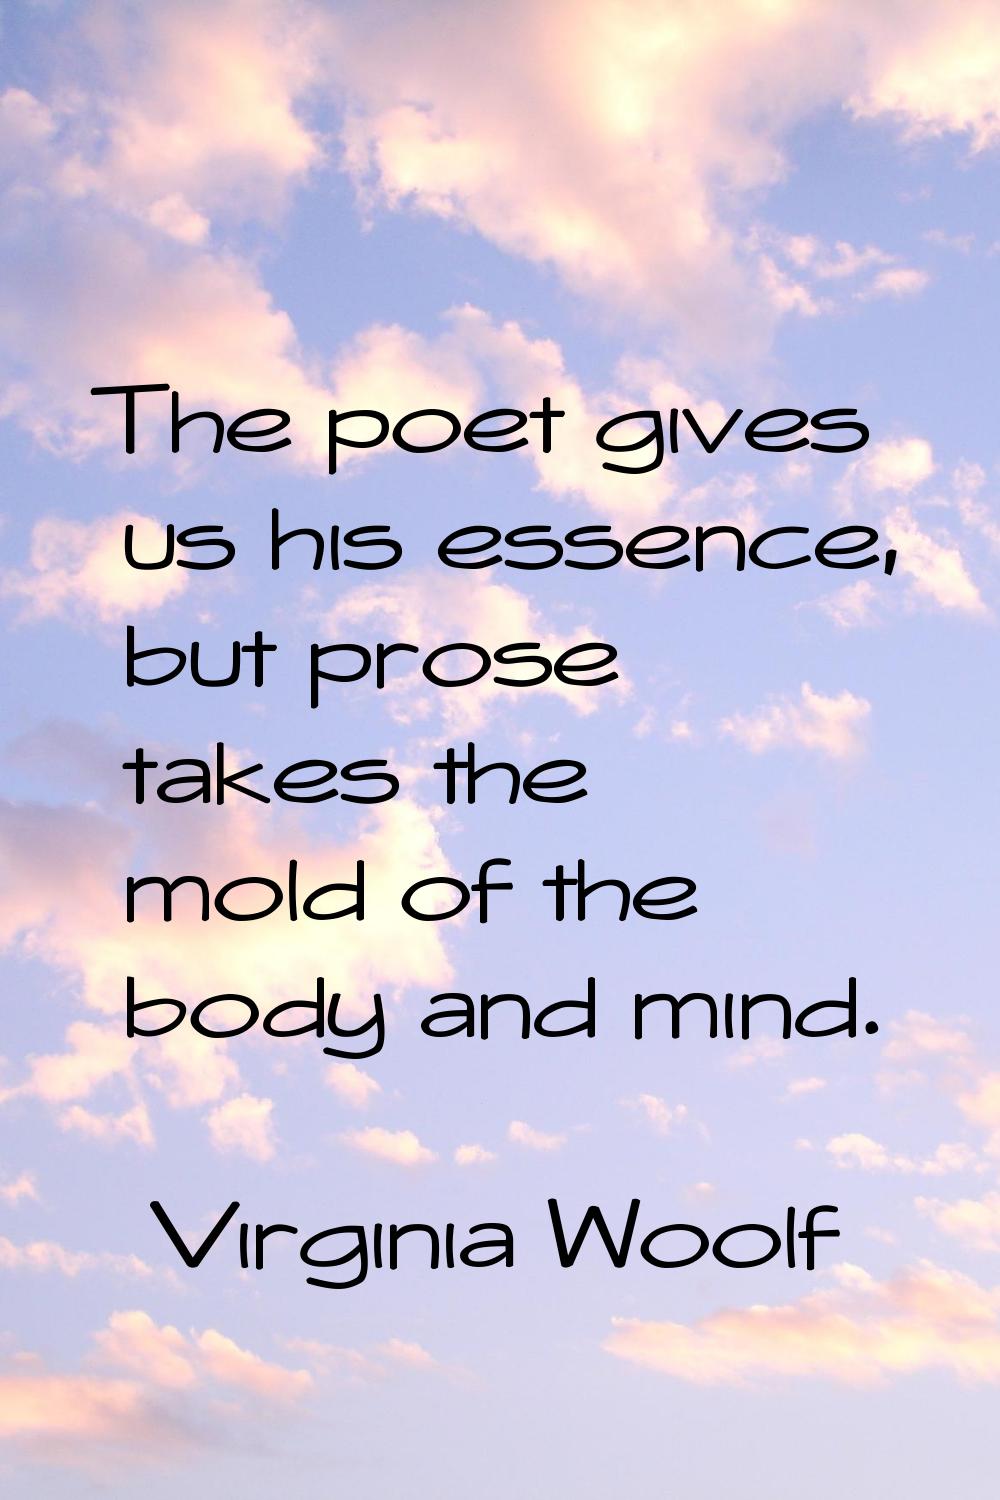 The poet gives us his essence, but prose takes the mold of the body and mind.